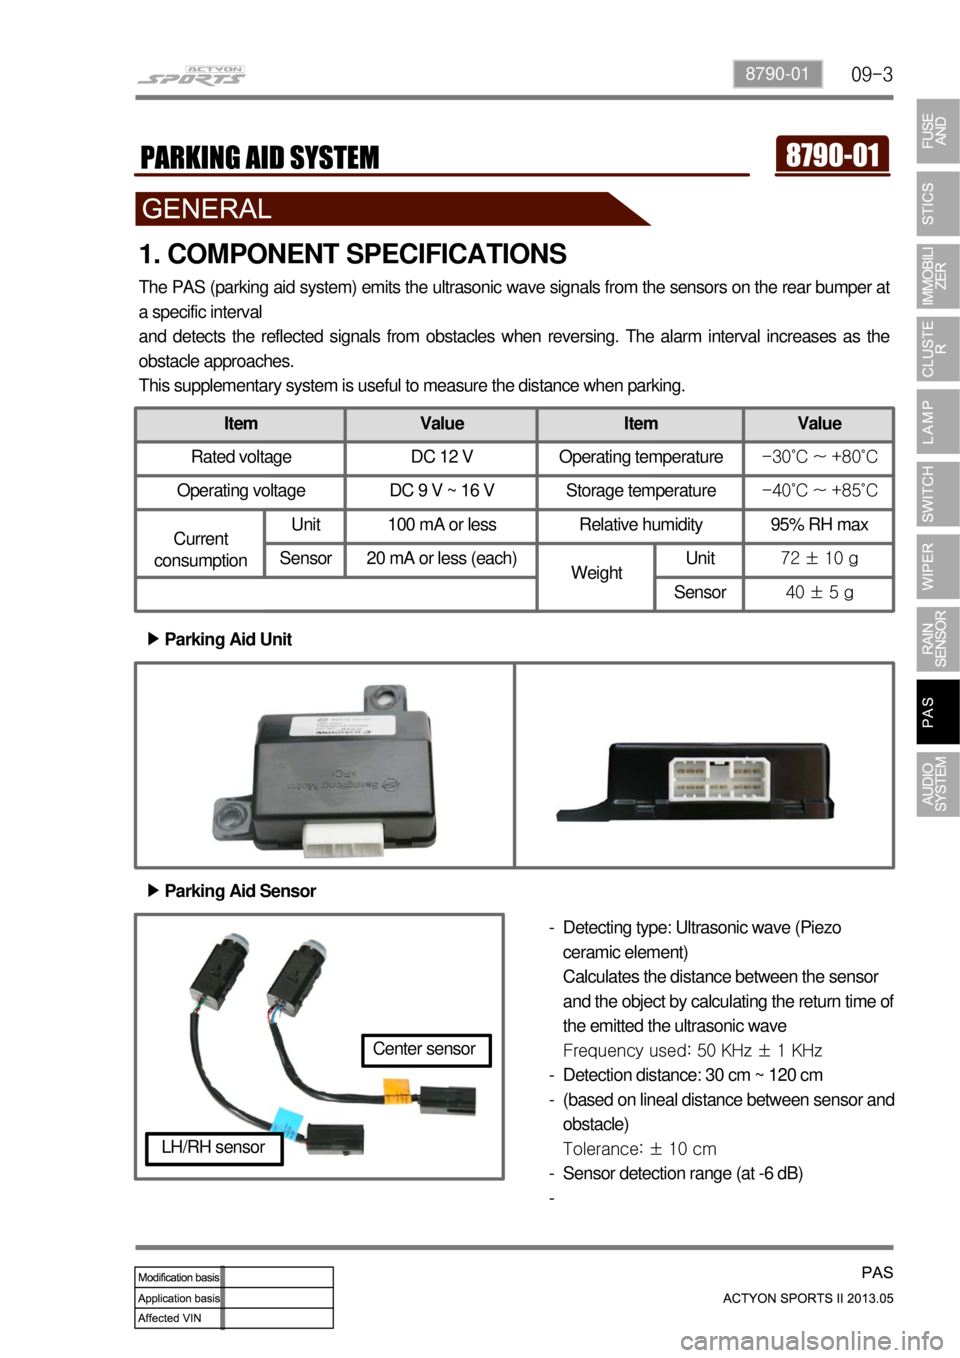 SSANGYONG NEW ACTYON SPORTS 2013  Service Manual 09-38790-01
1. COMPONENT SPECIFICATIONS
The PAS (parking aid system) emits the ultrasonic wave signals from the sensors on the rear bumper at 
a specific interval
and detects the reflected signals fro